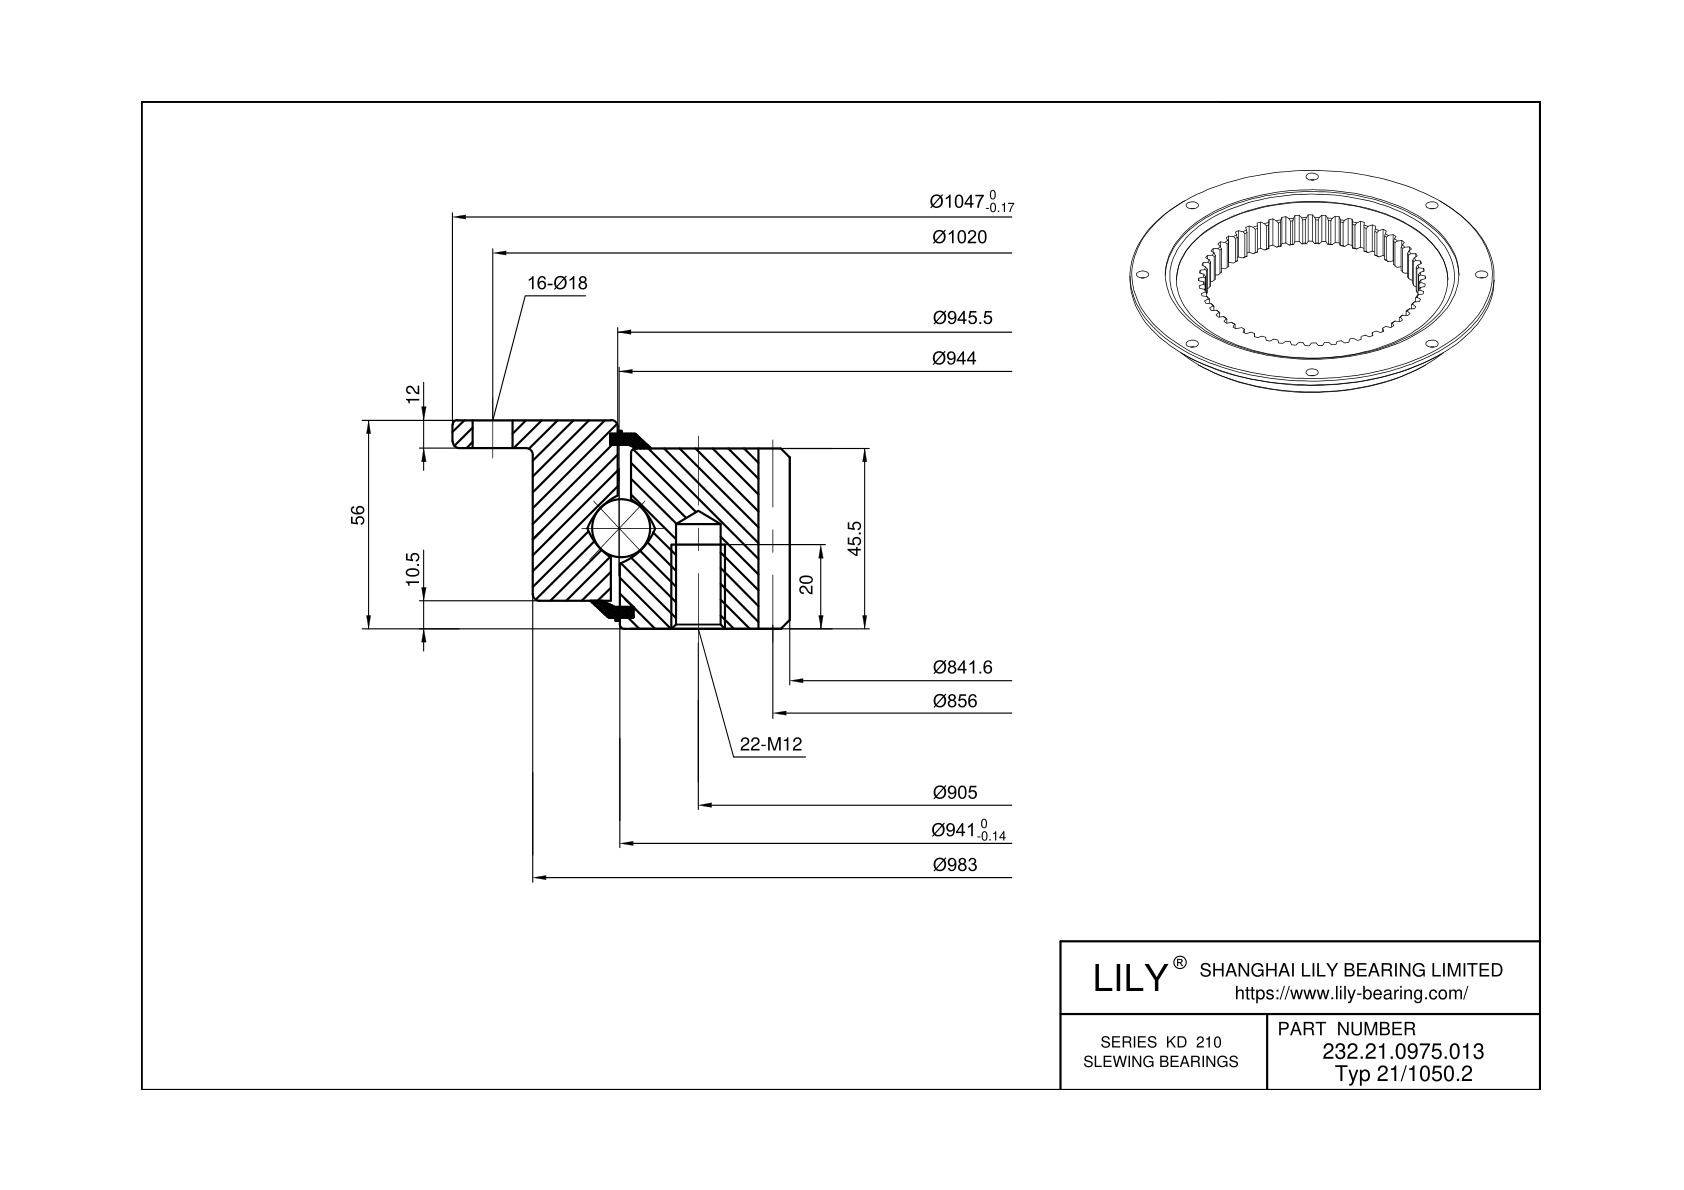 232.21.0975.013 Type 21/1050.2 Four Point Contact Ball Slewing Ring Bearing cad drawing